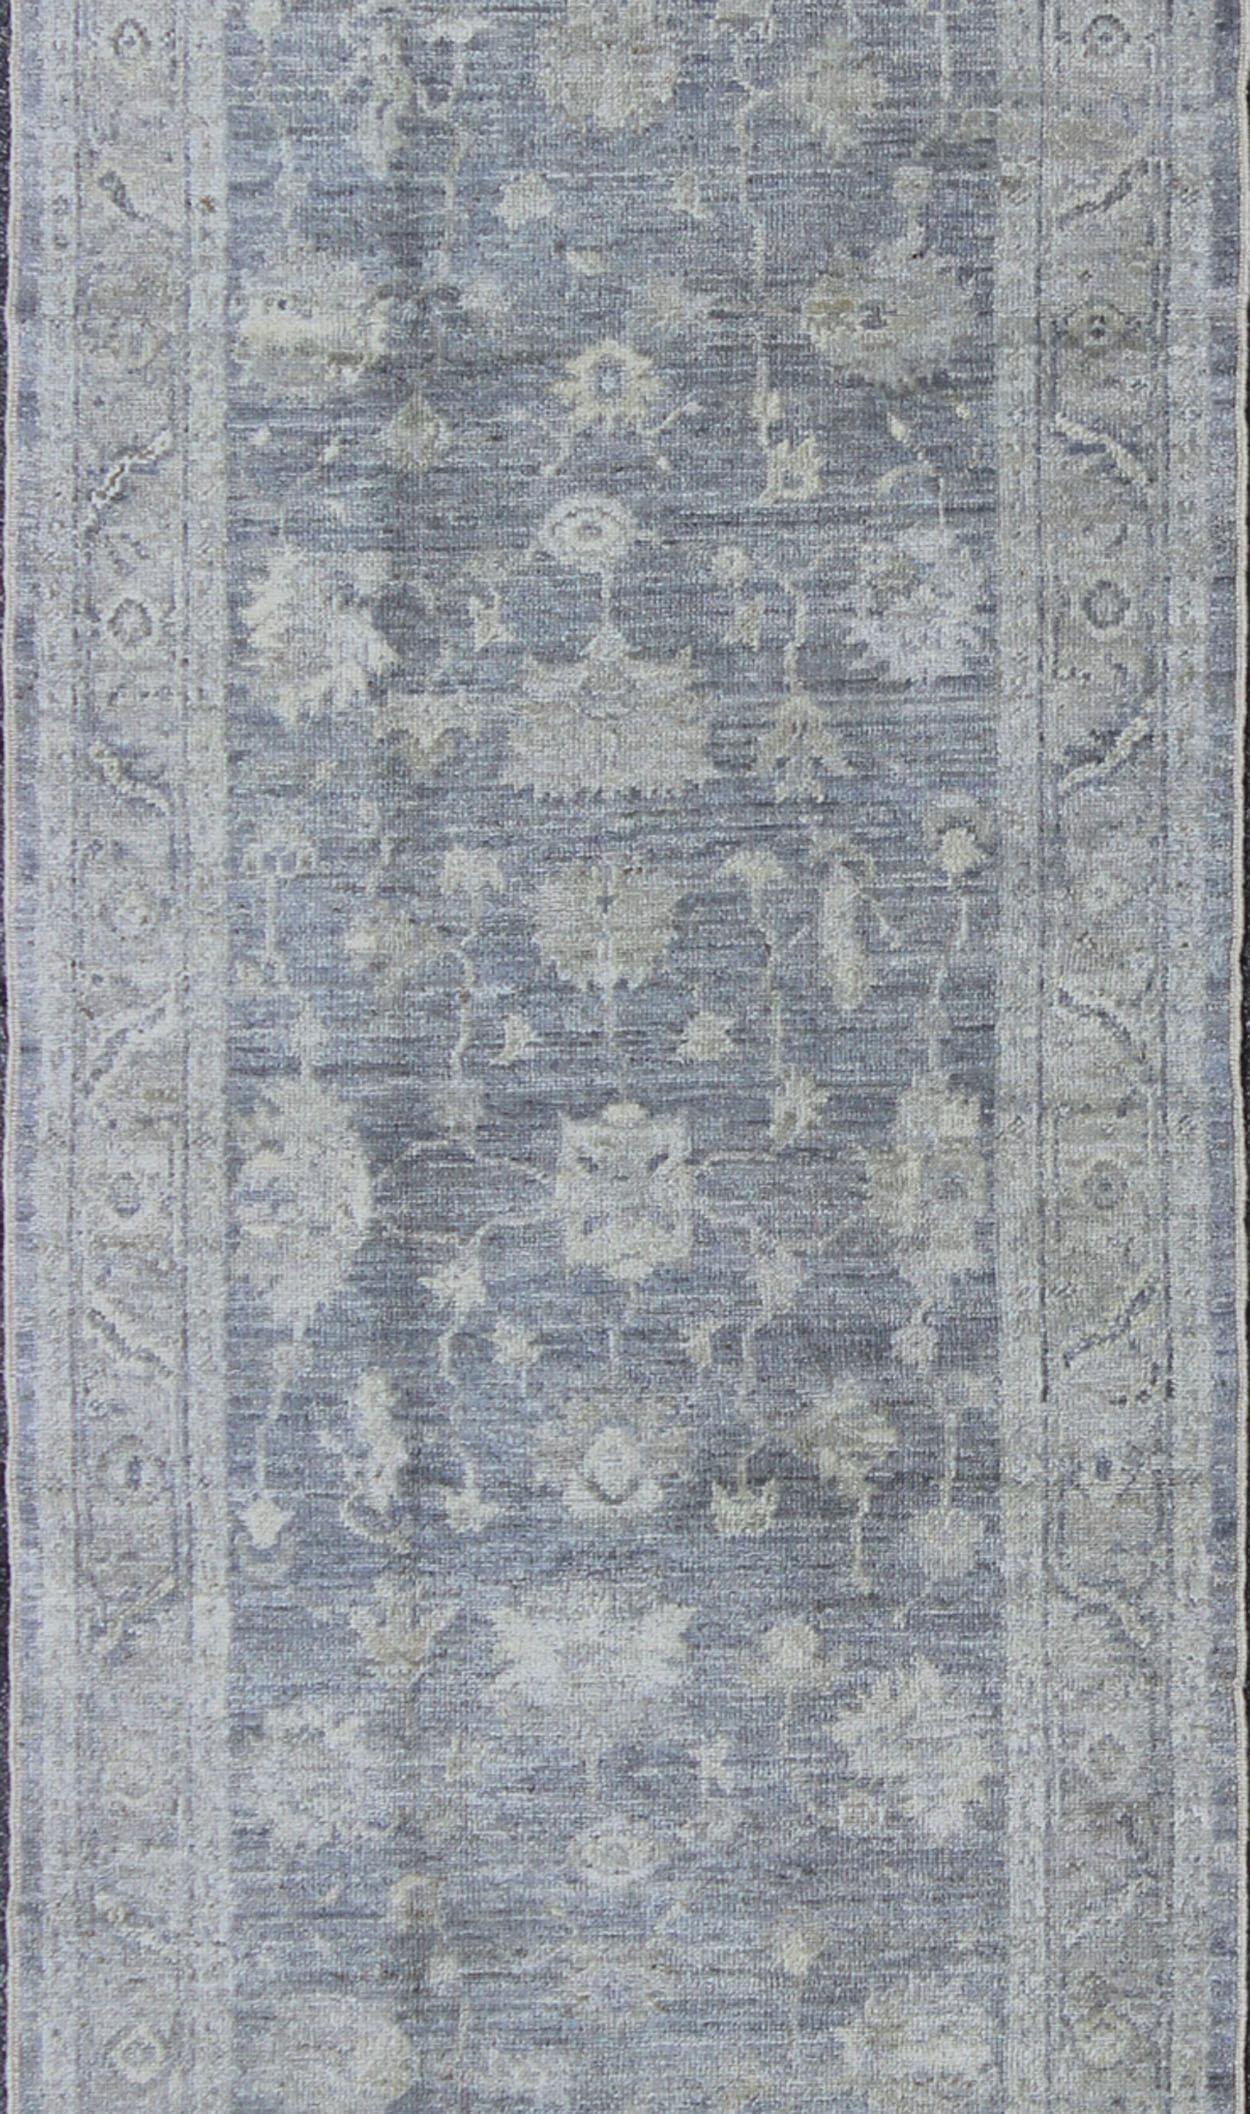 Keivan Woven Arts Angora Oushak Gallery Rug in Gray and Silver   4' x 13' In Excellent Condition For Sale In Atlanta, GA